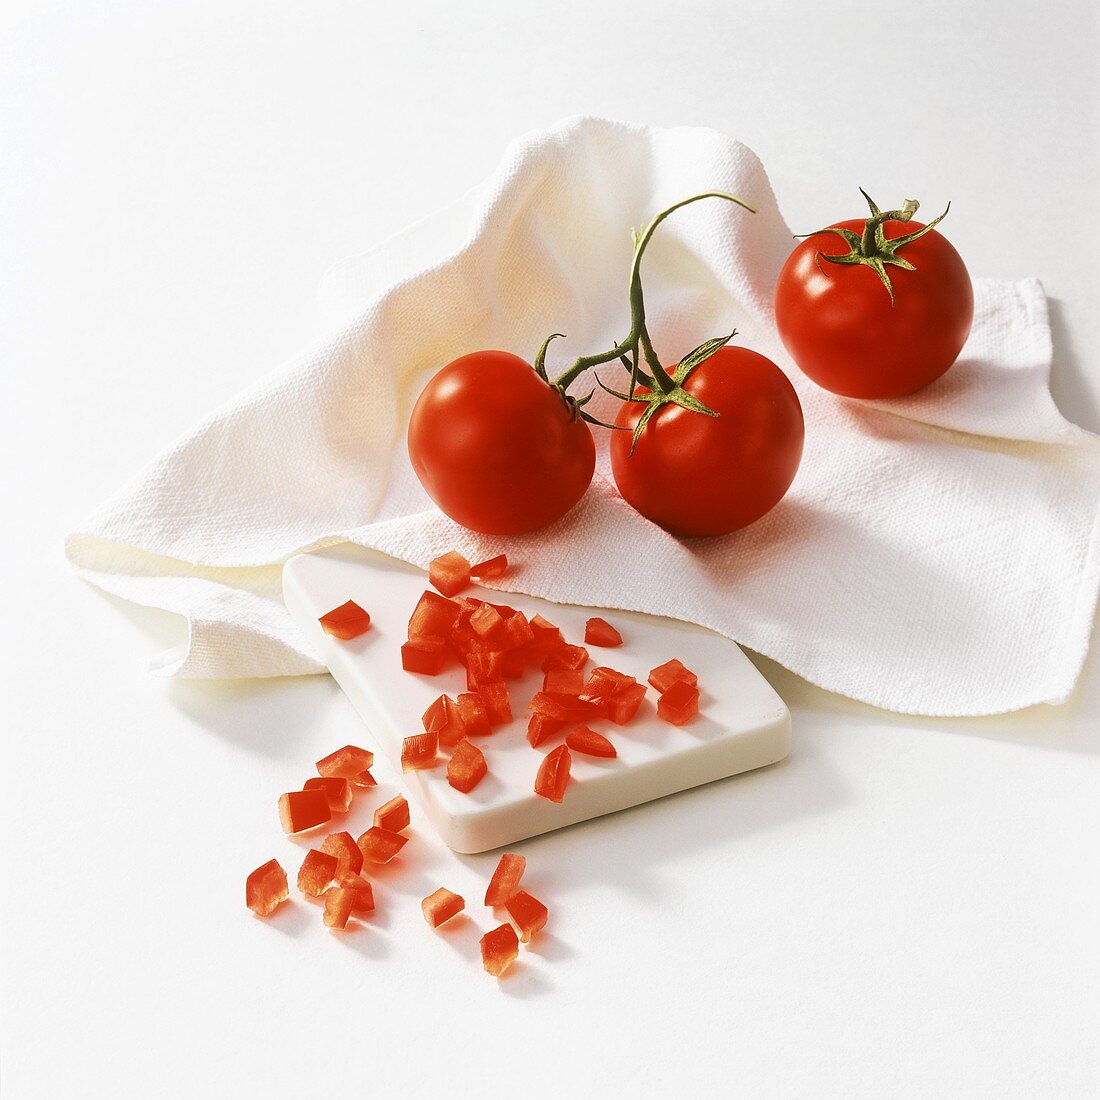 Vine tomatoes & diced tomatoes on cloth & chopping board